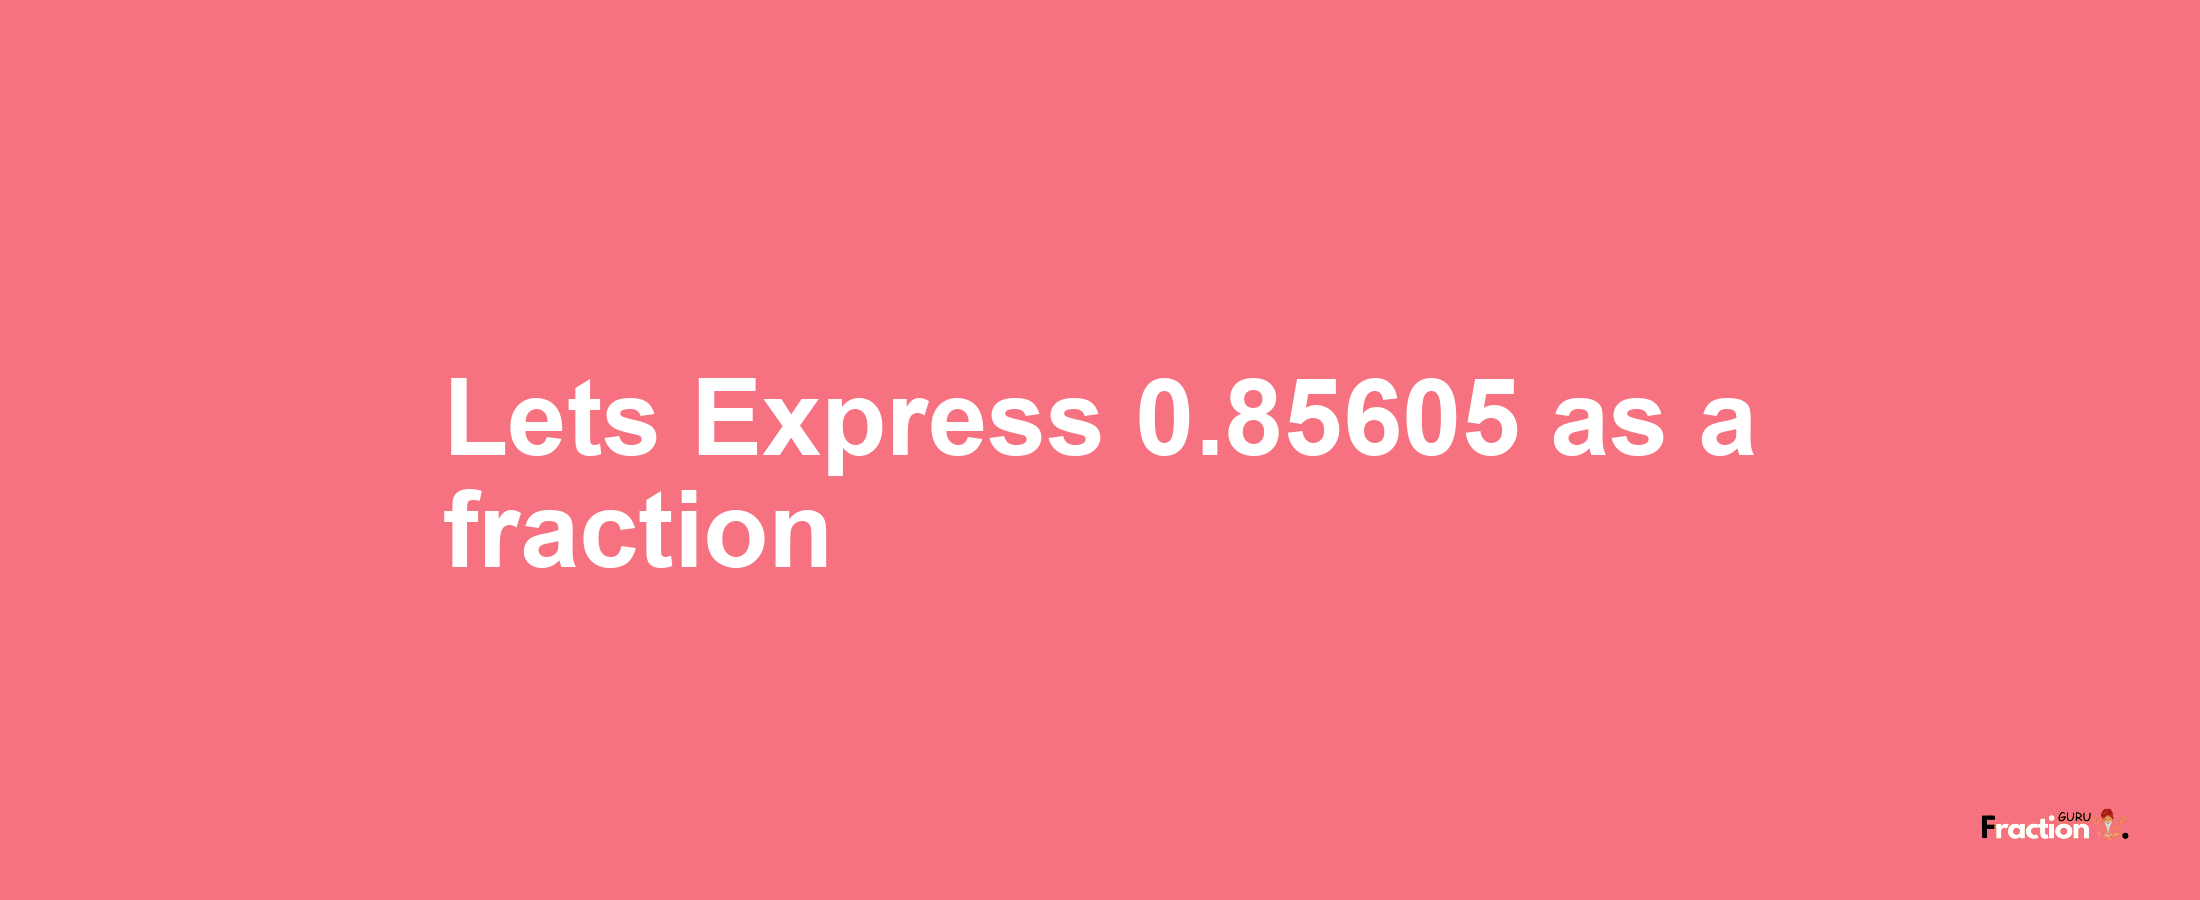 Lets Express 0.85605 as afraction